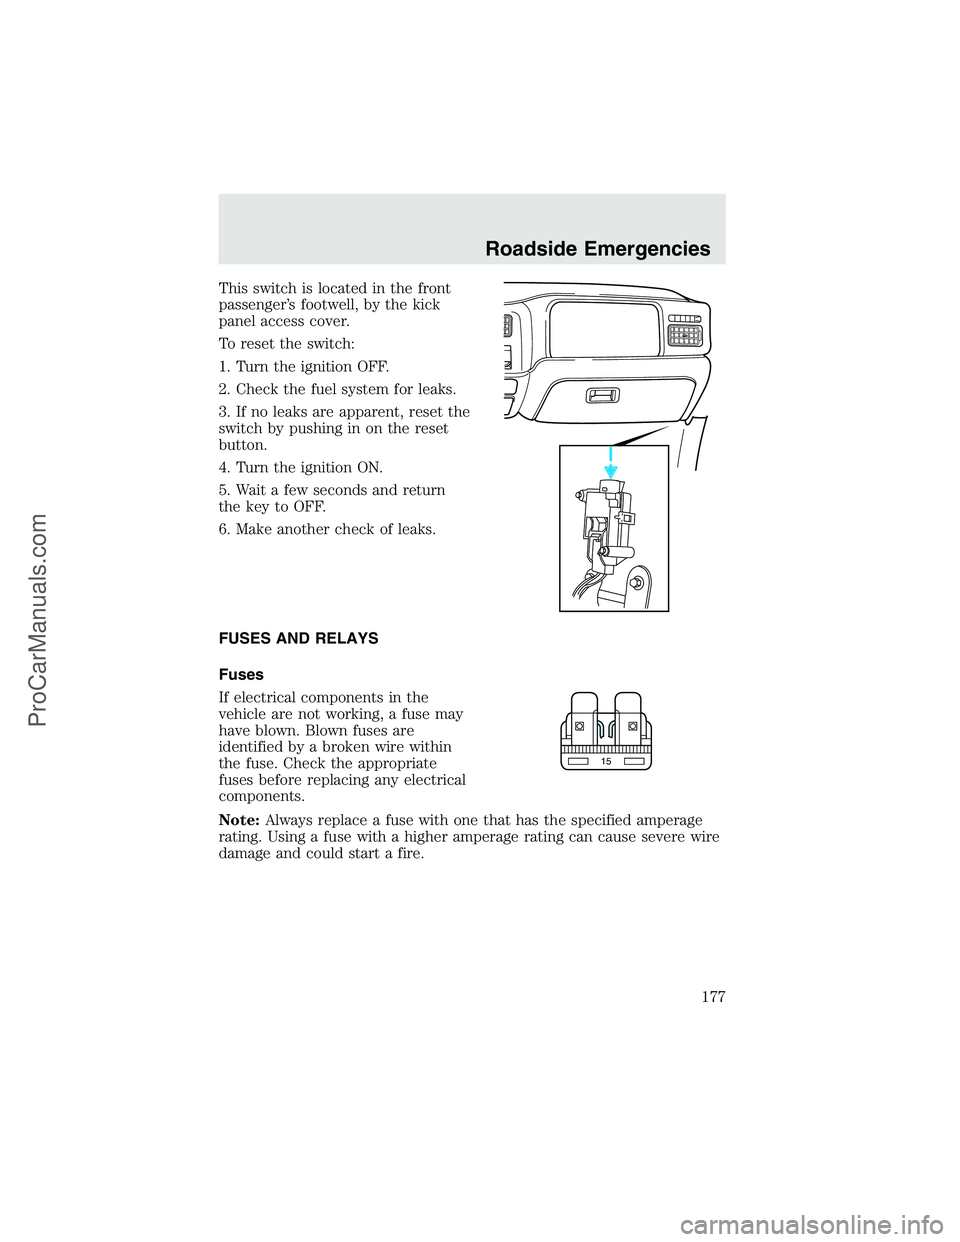 FORD F350 2003  Owners Manual This switch is located in the front
passenger’s footwell, by the kick
panel access cover.
To reset the switch:
1. Turn the ignition OFF.
2. Check the fuel system for leaks.
3. If no leaks are appare